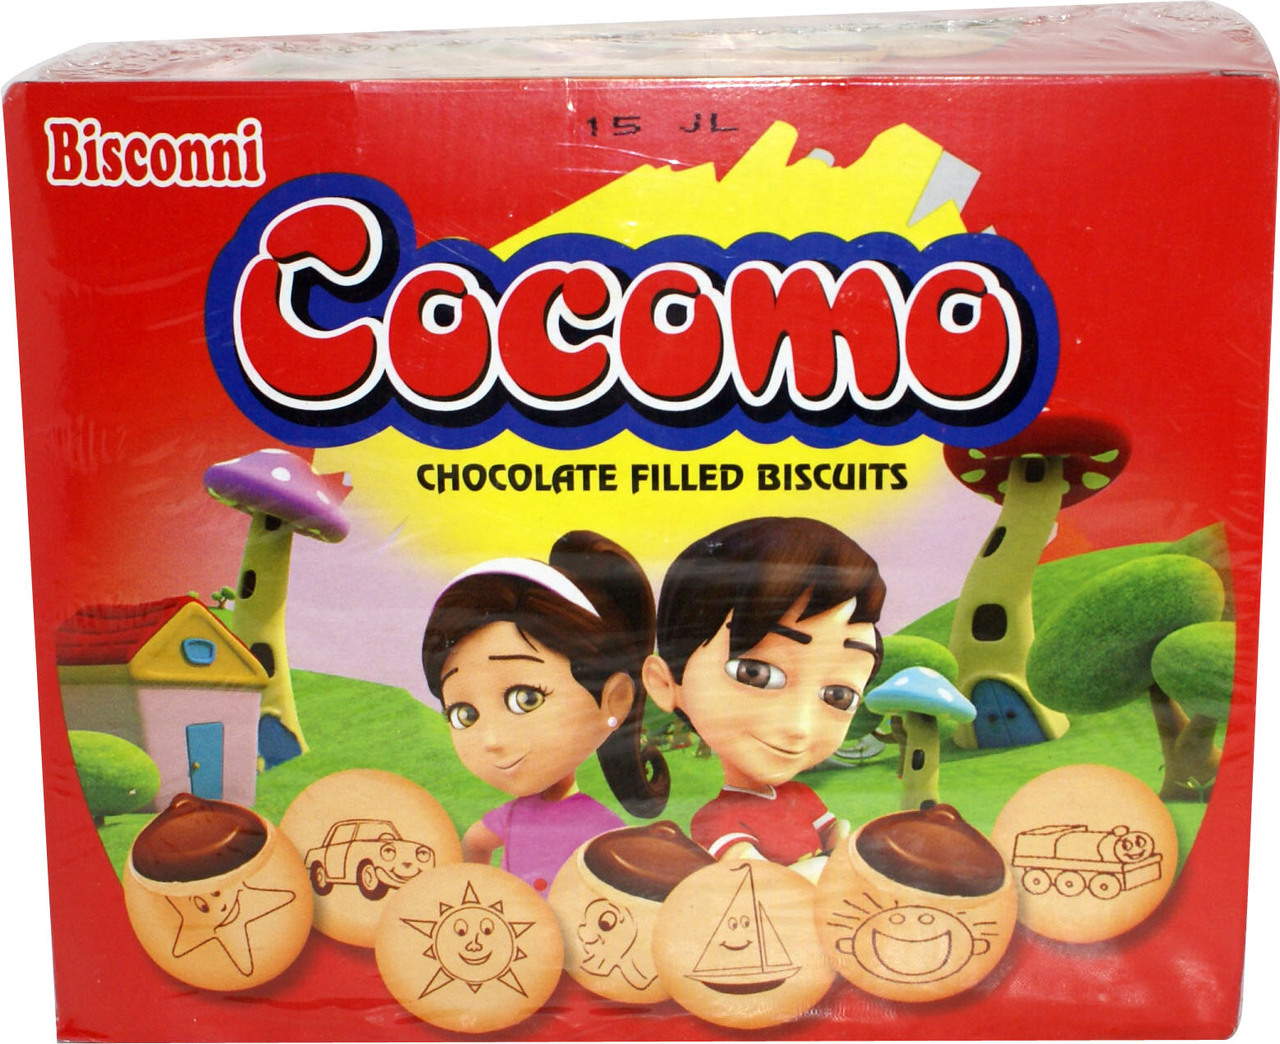 Bisconi Cocomo Pack of 24